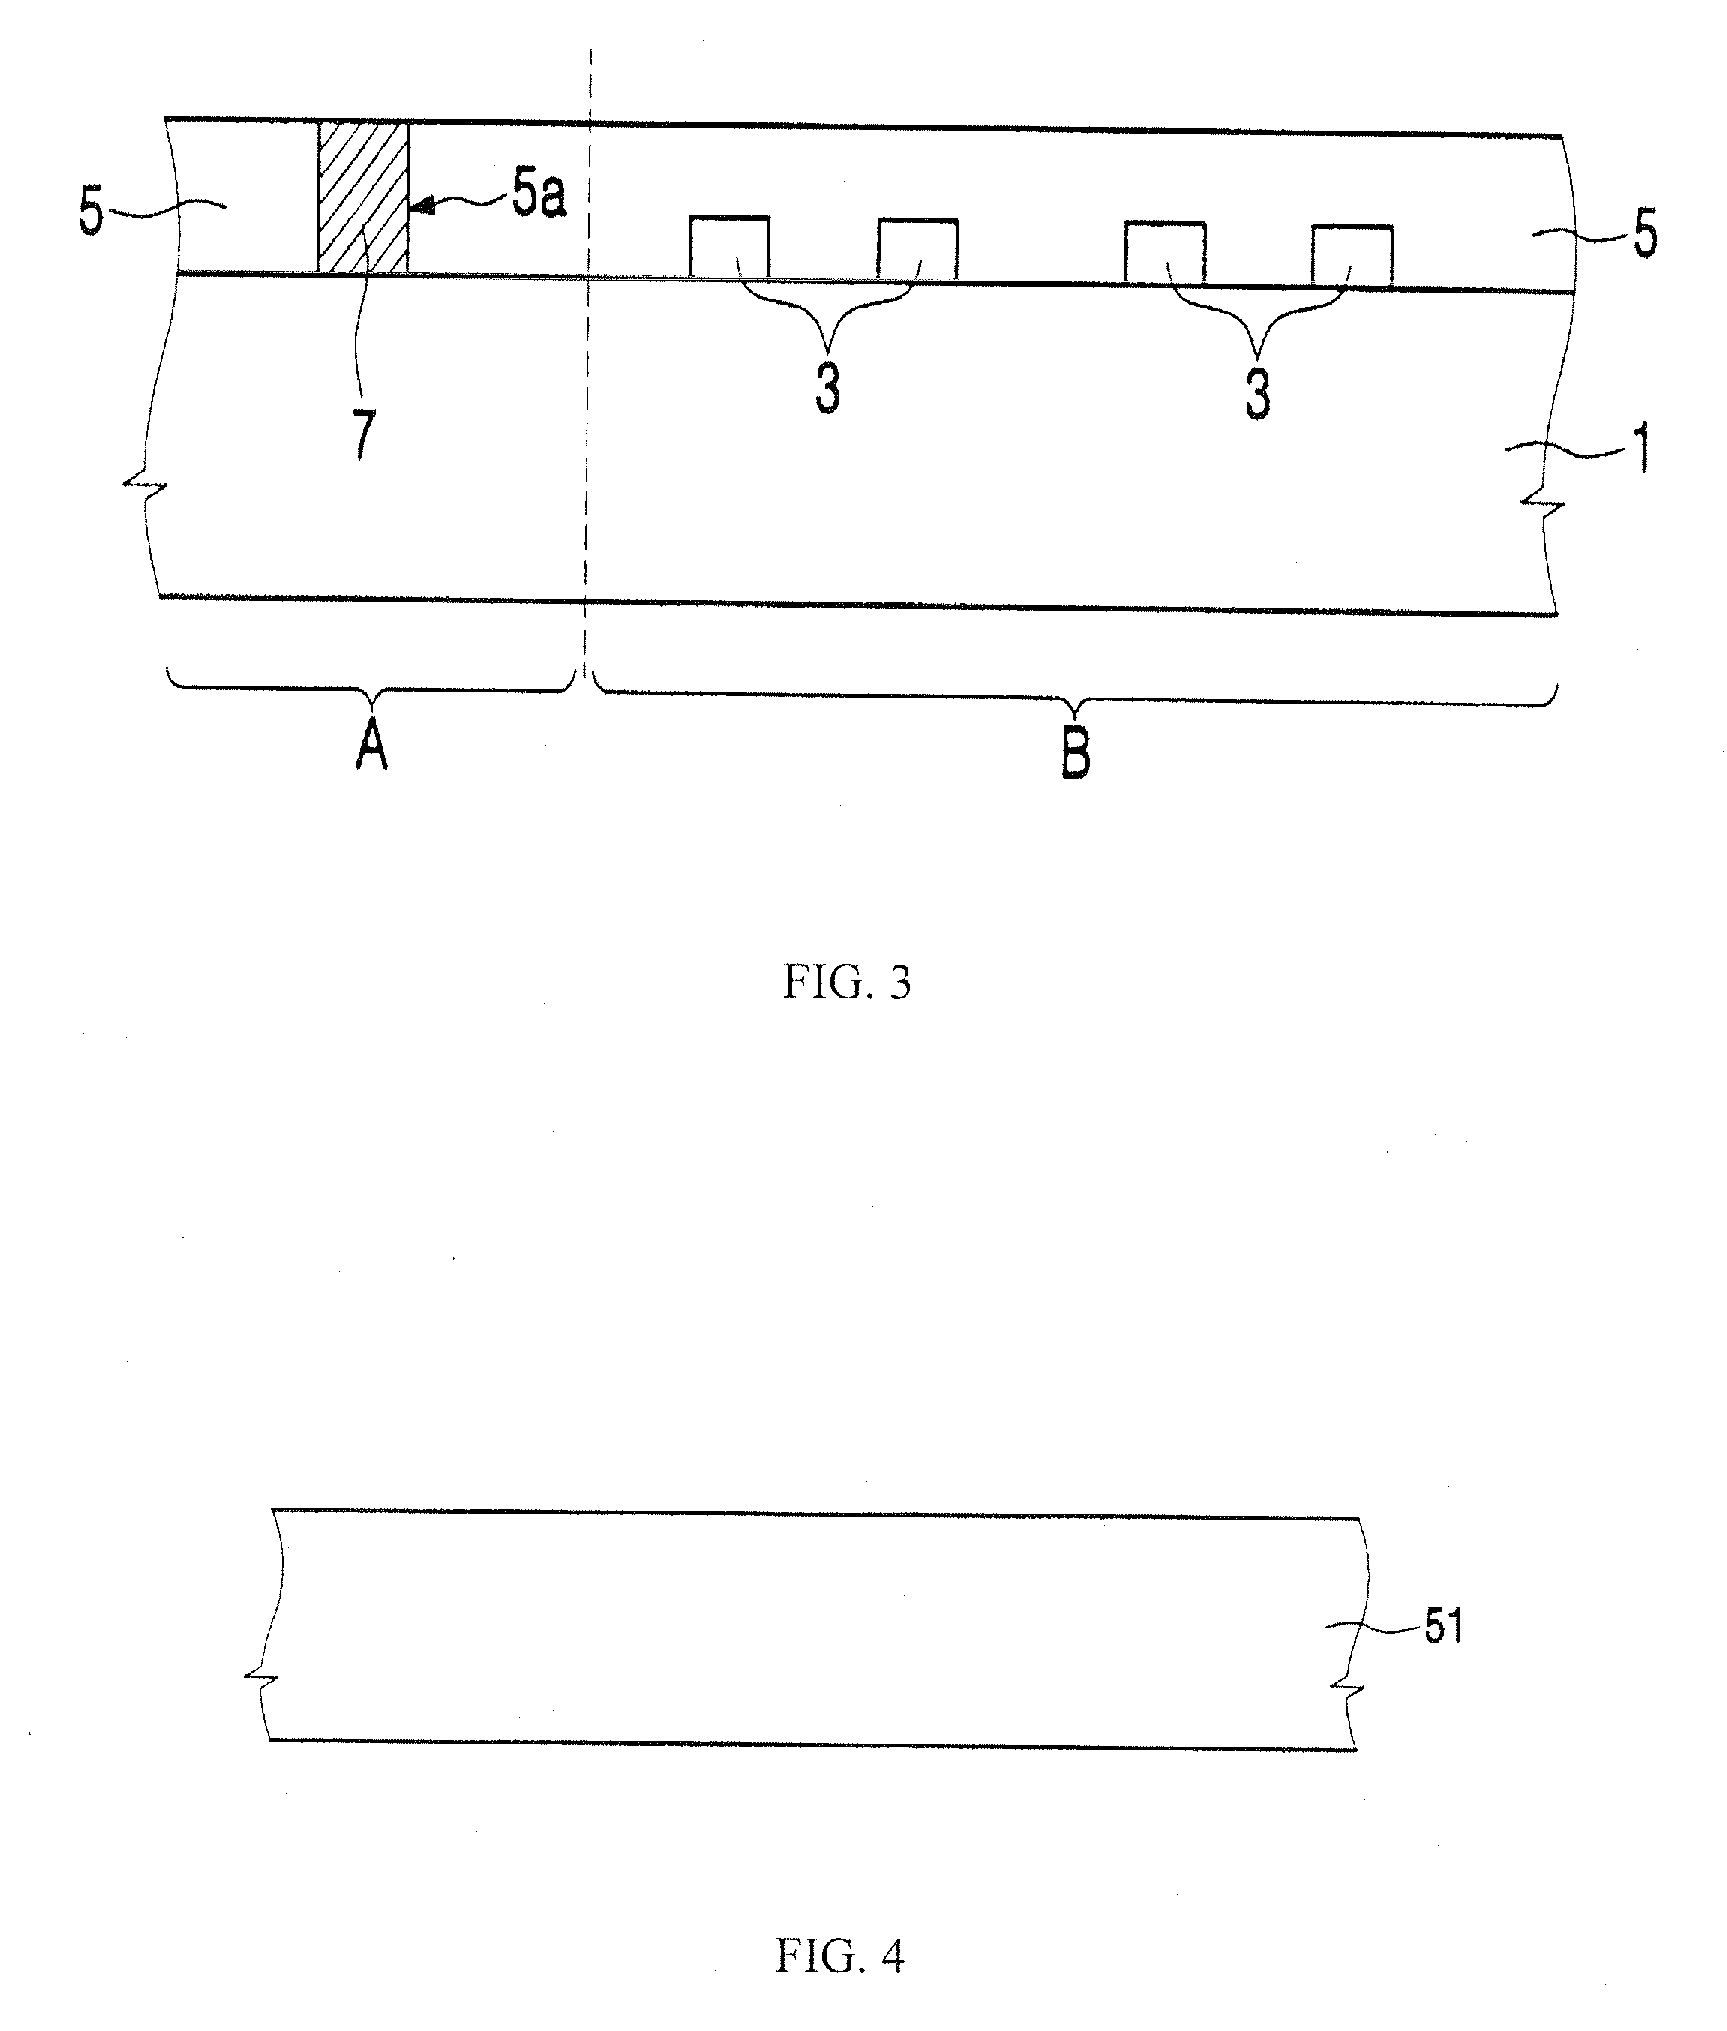 Methods of manufacturing a three-dimensional semiconductor device and semiconductor devices fabricated thereby